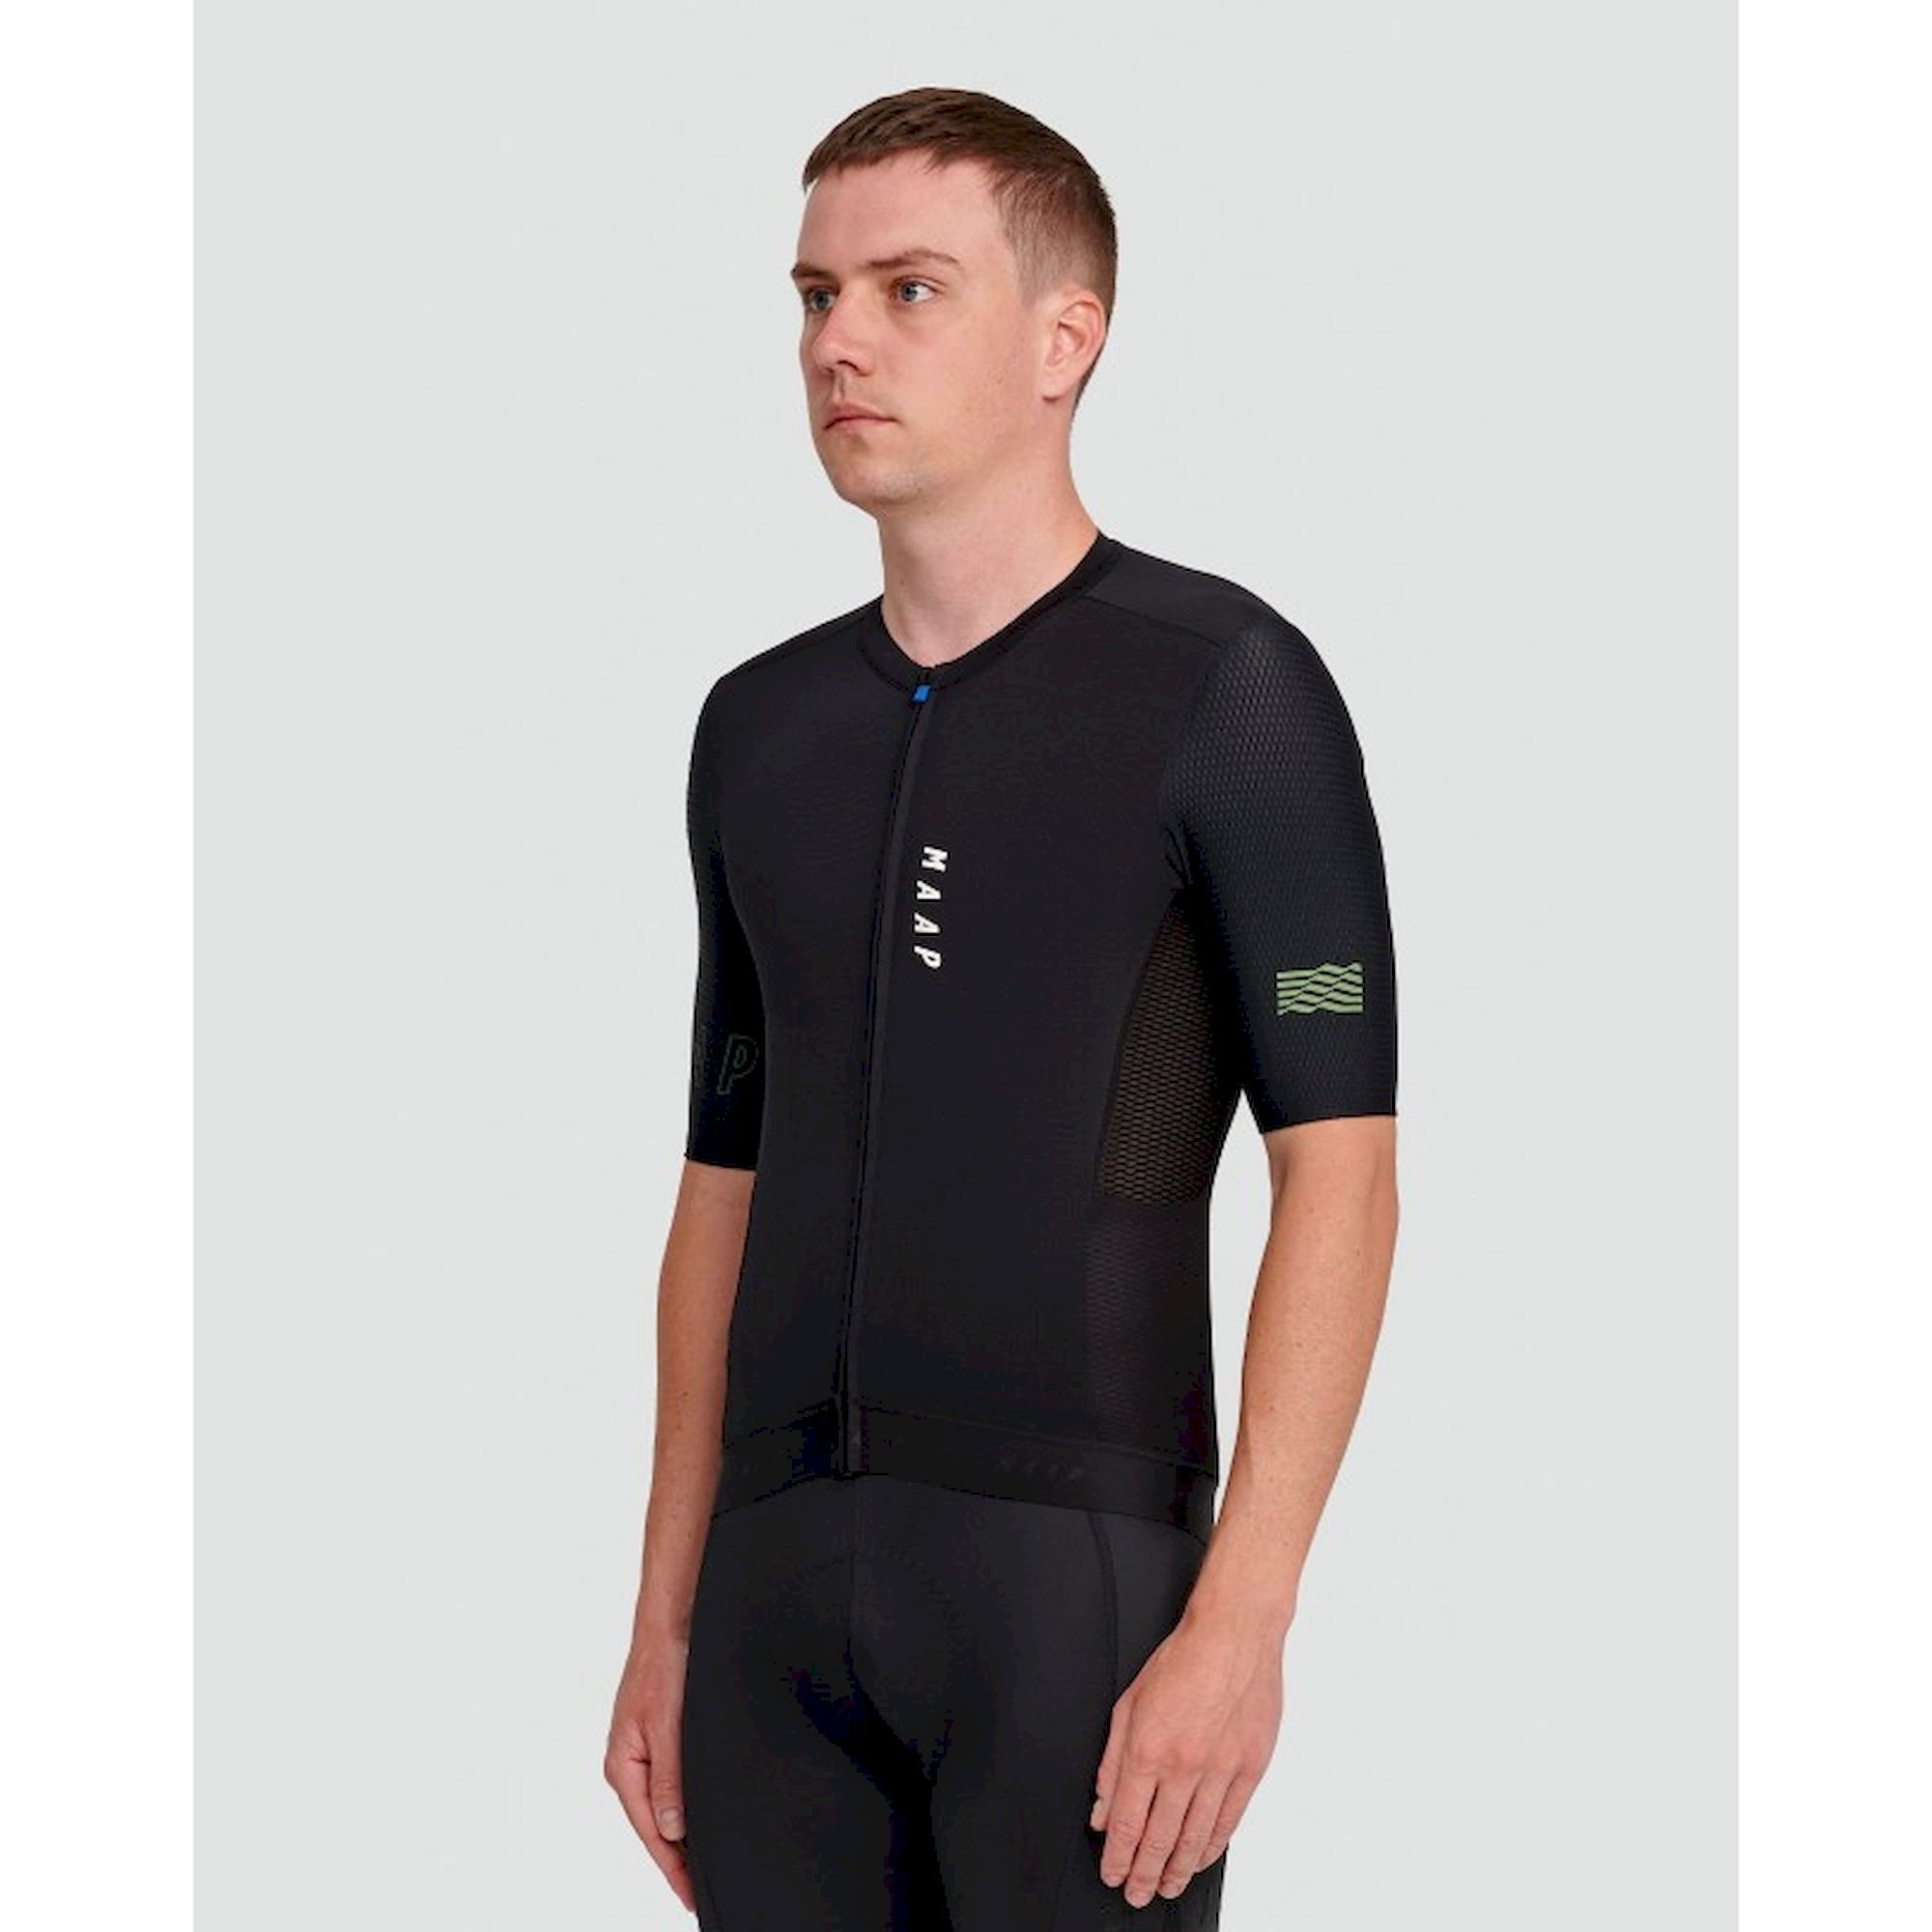 Stealth Race Fit Jersey - ciclismo - | Hardloop